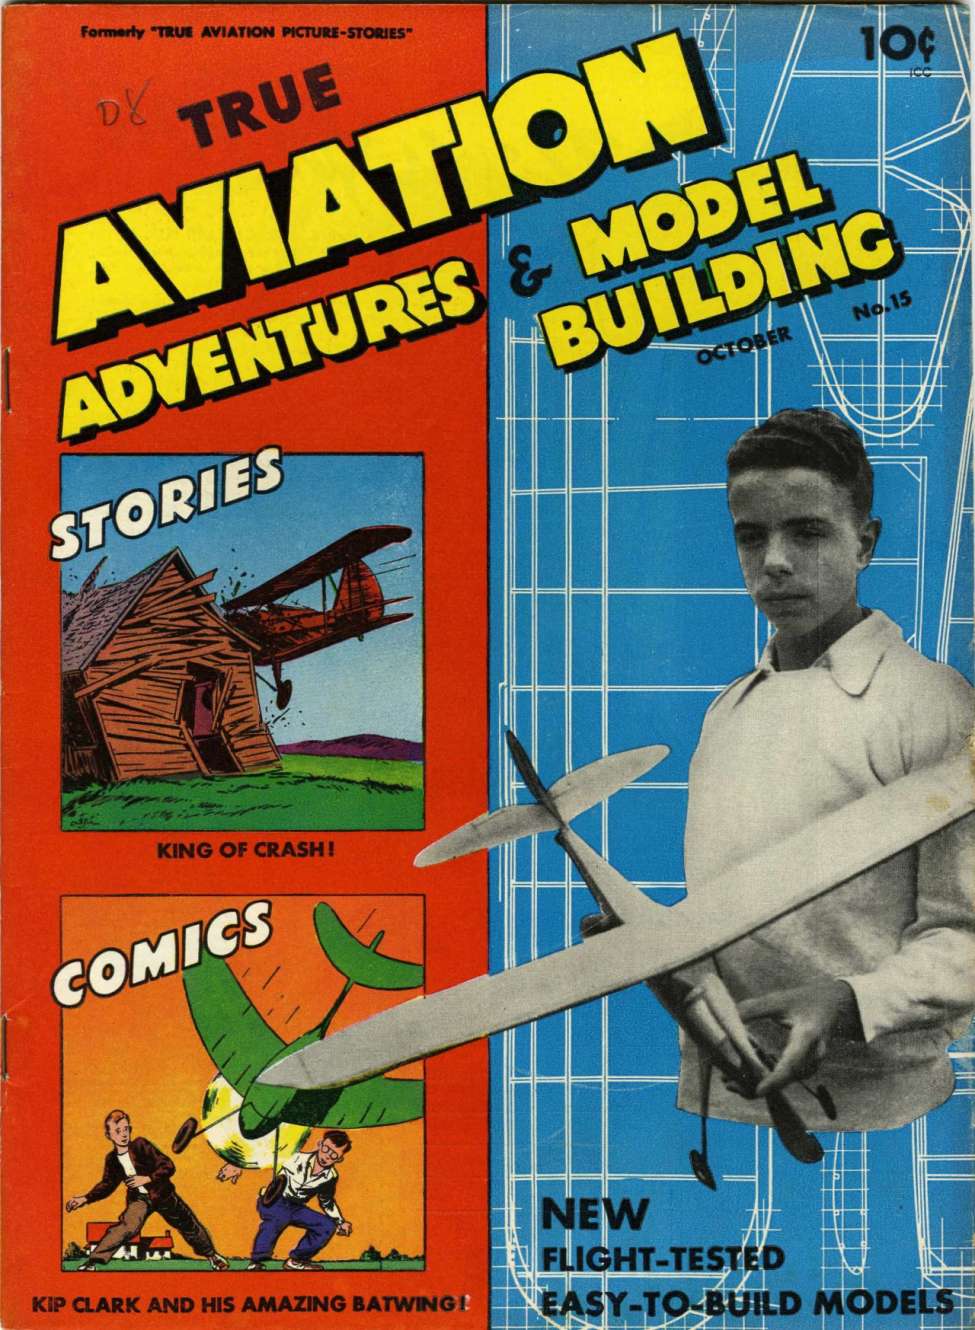 Comic Book Cover For True Aviation Picture Stories 15